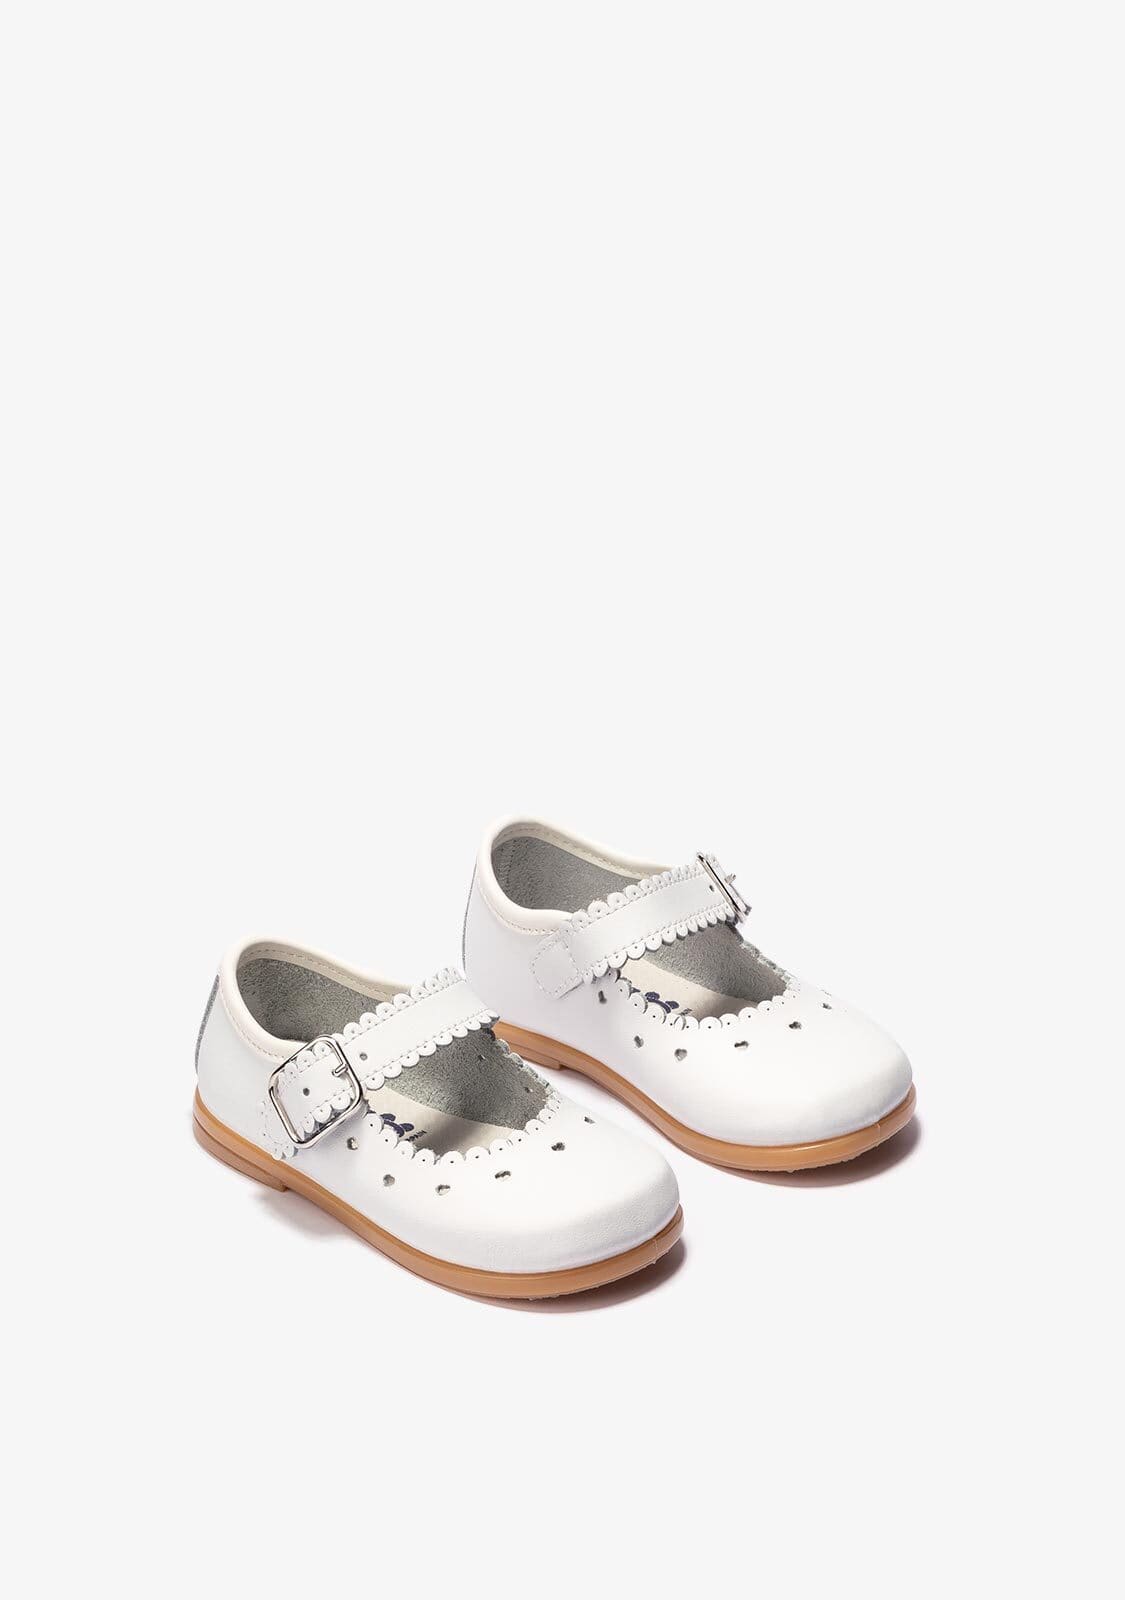 OSITO Shoes Baby's White Buckle Waves Shoes Napa